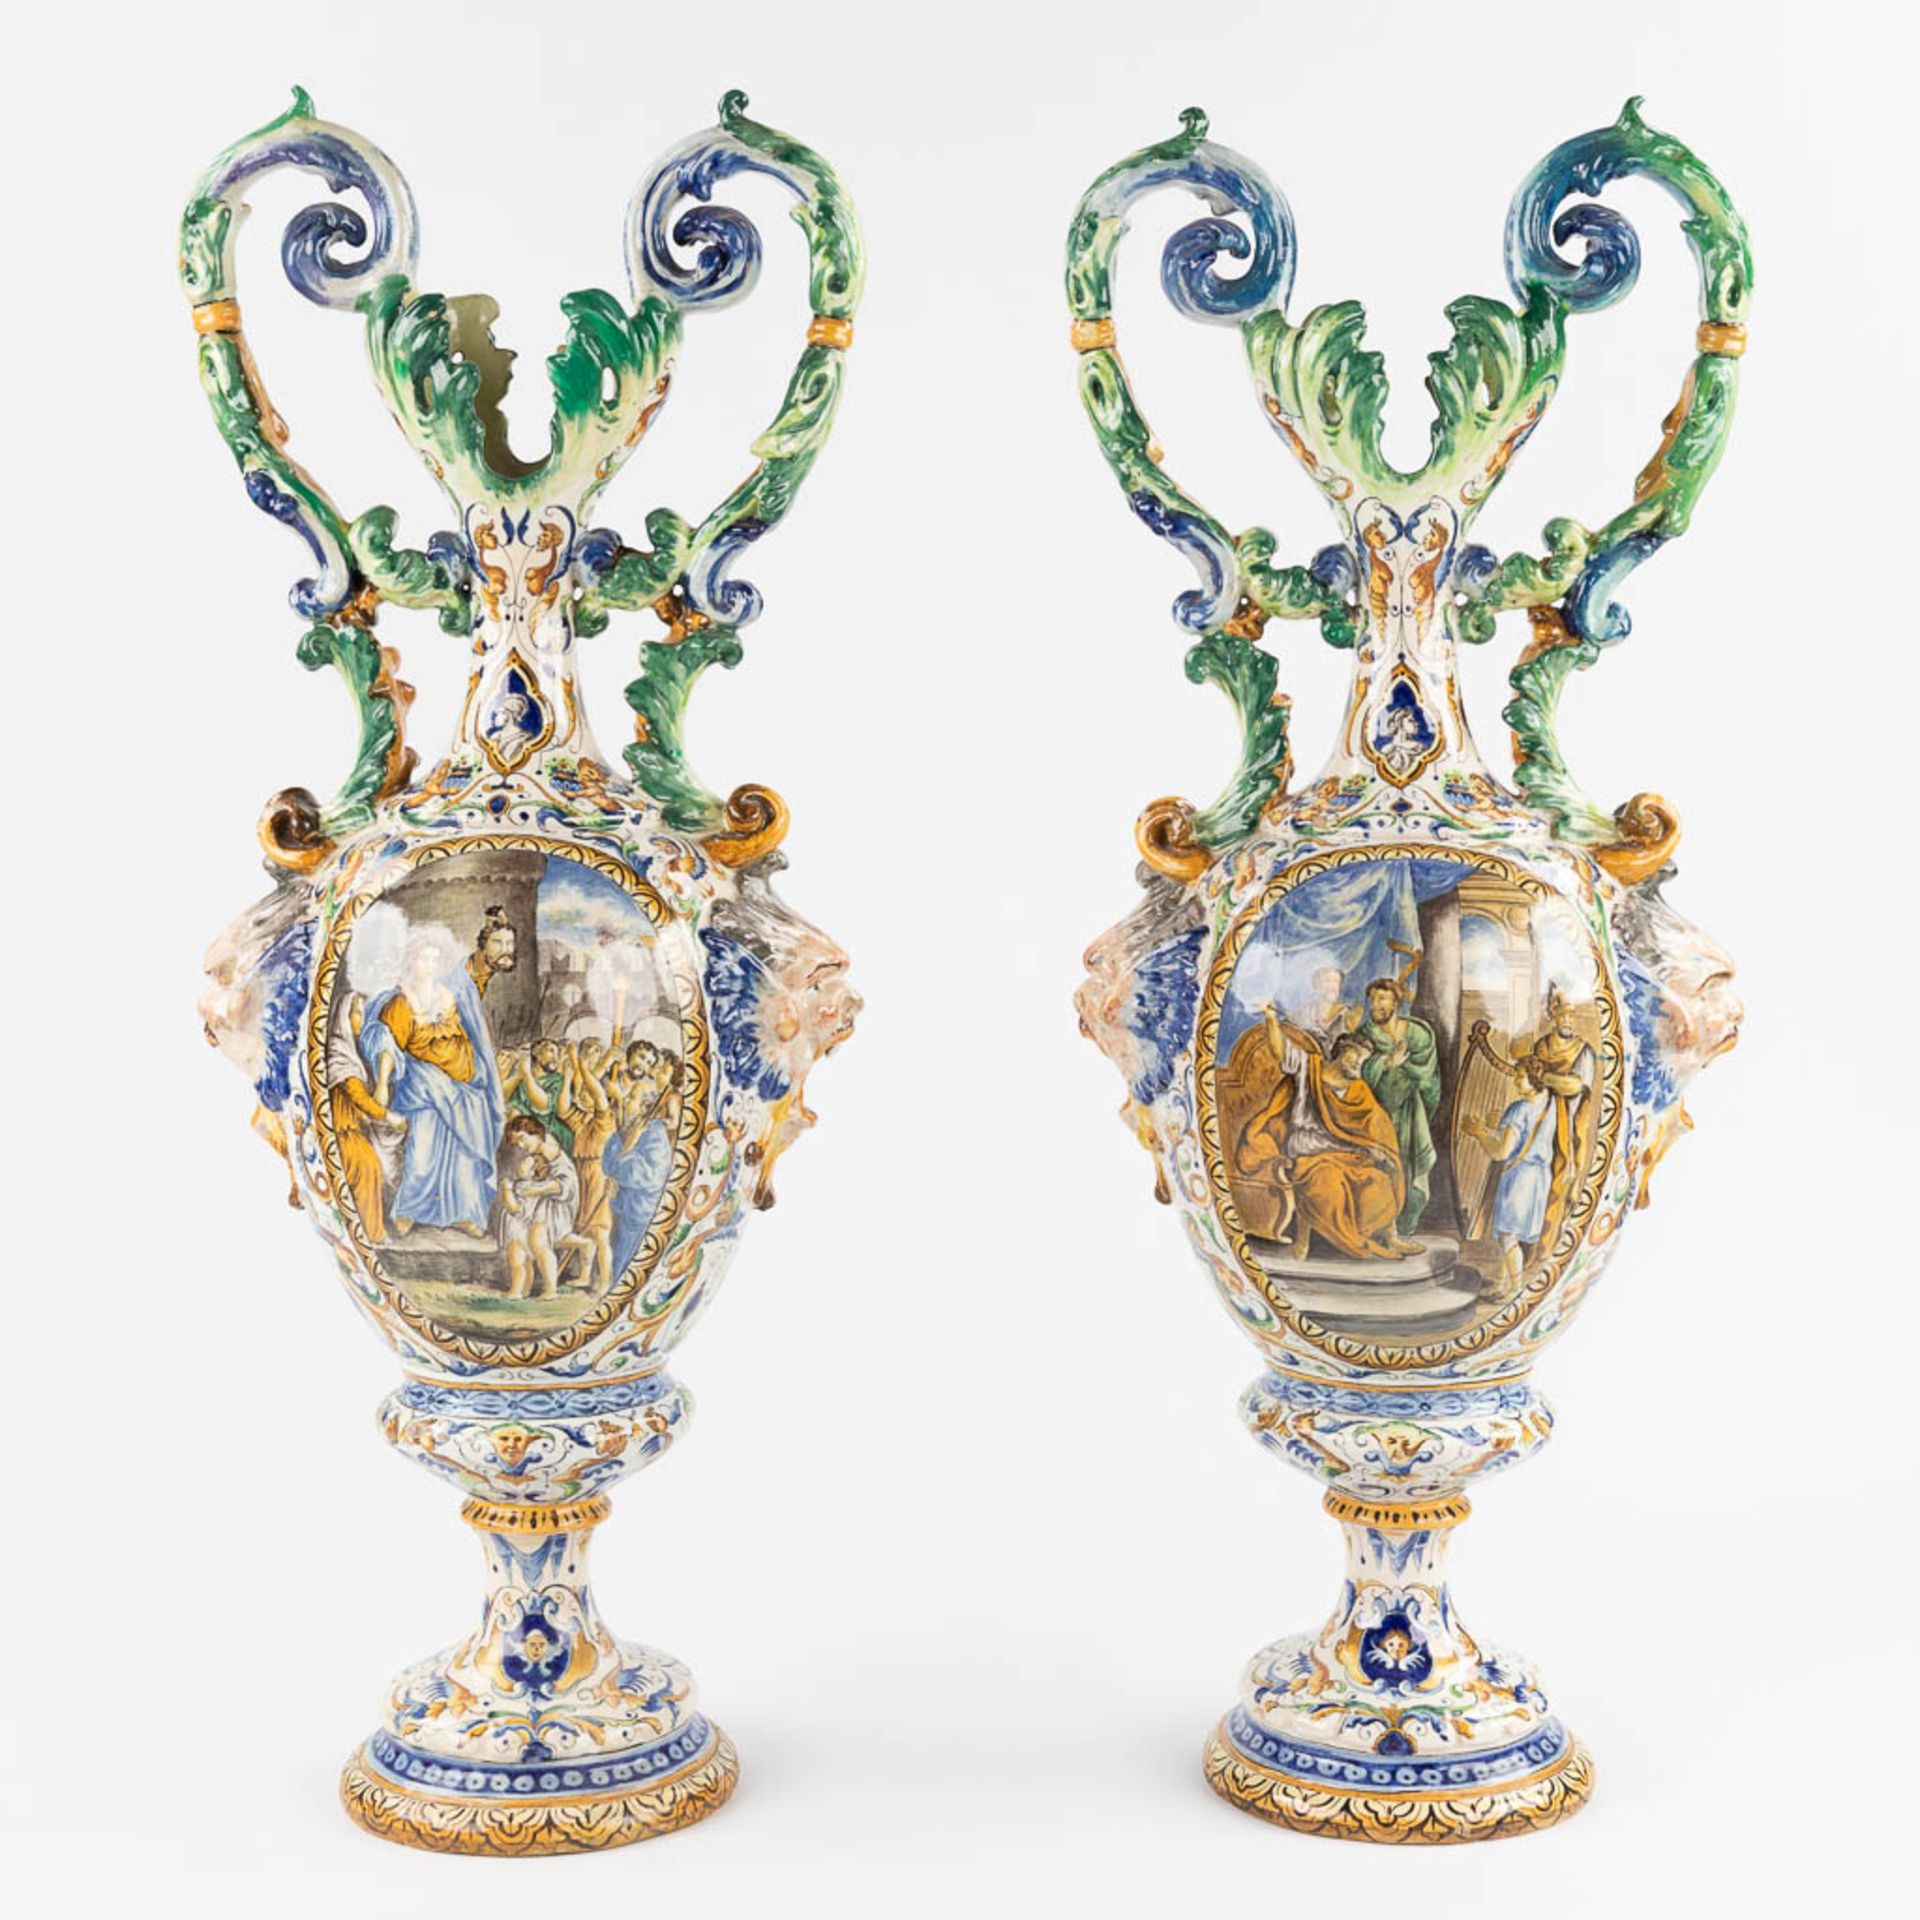 A pair of large vases, Italian Renaissance style, glazed faience. 20th C. (D:45 x W:45 x H:205 cm) - Image 3 of 31